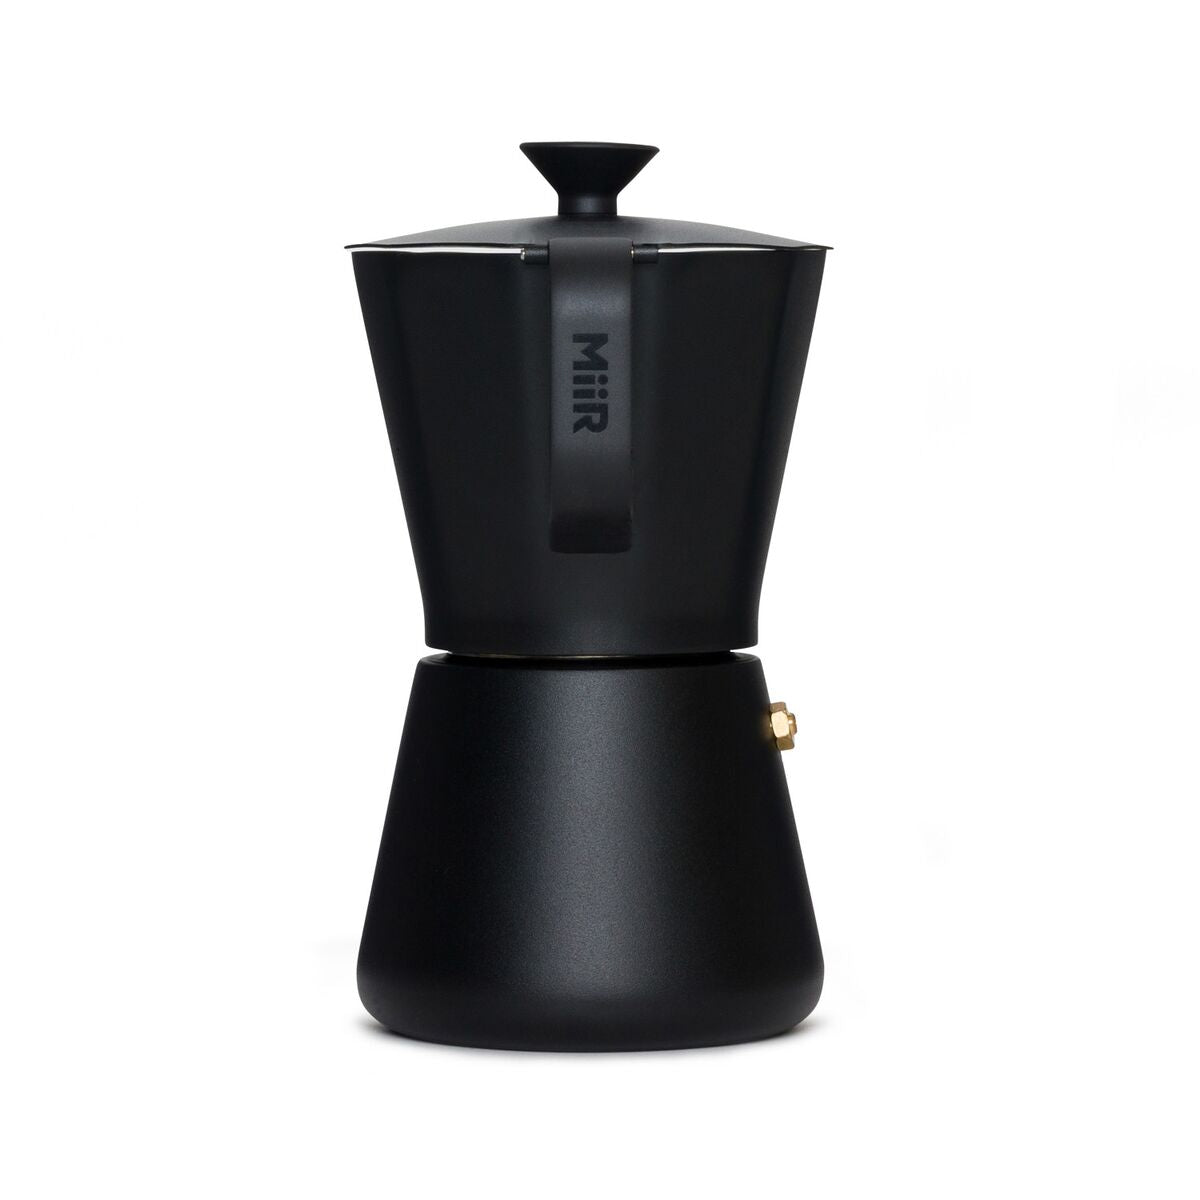 Are you looking for a Bialetti induction coffee machine?